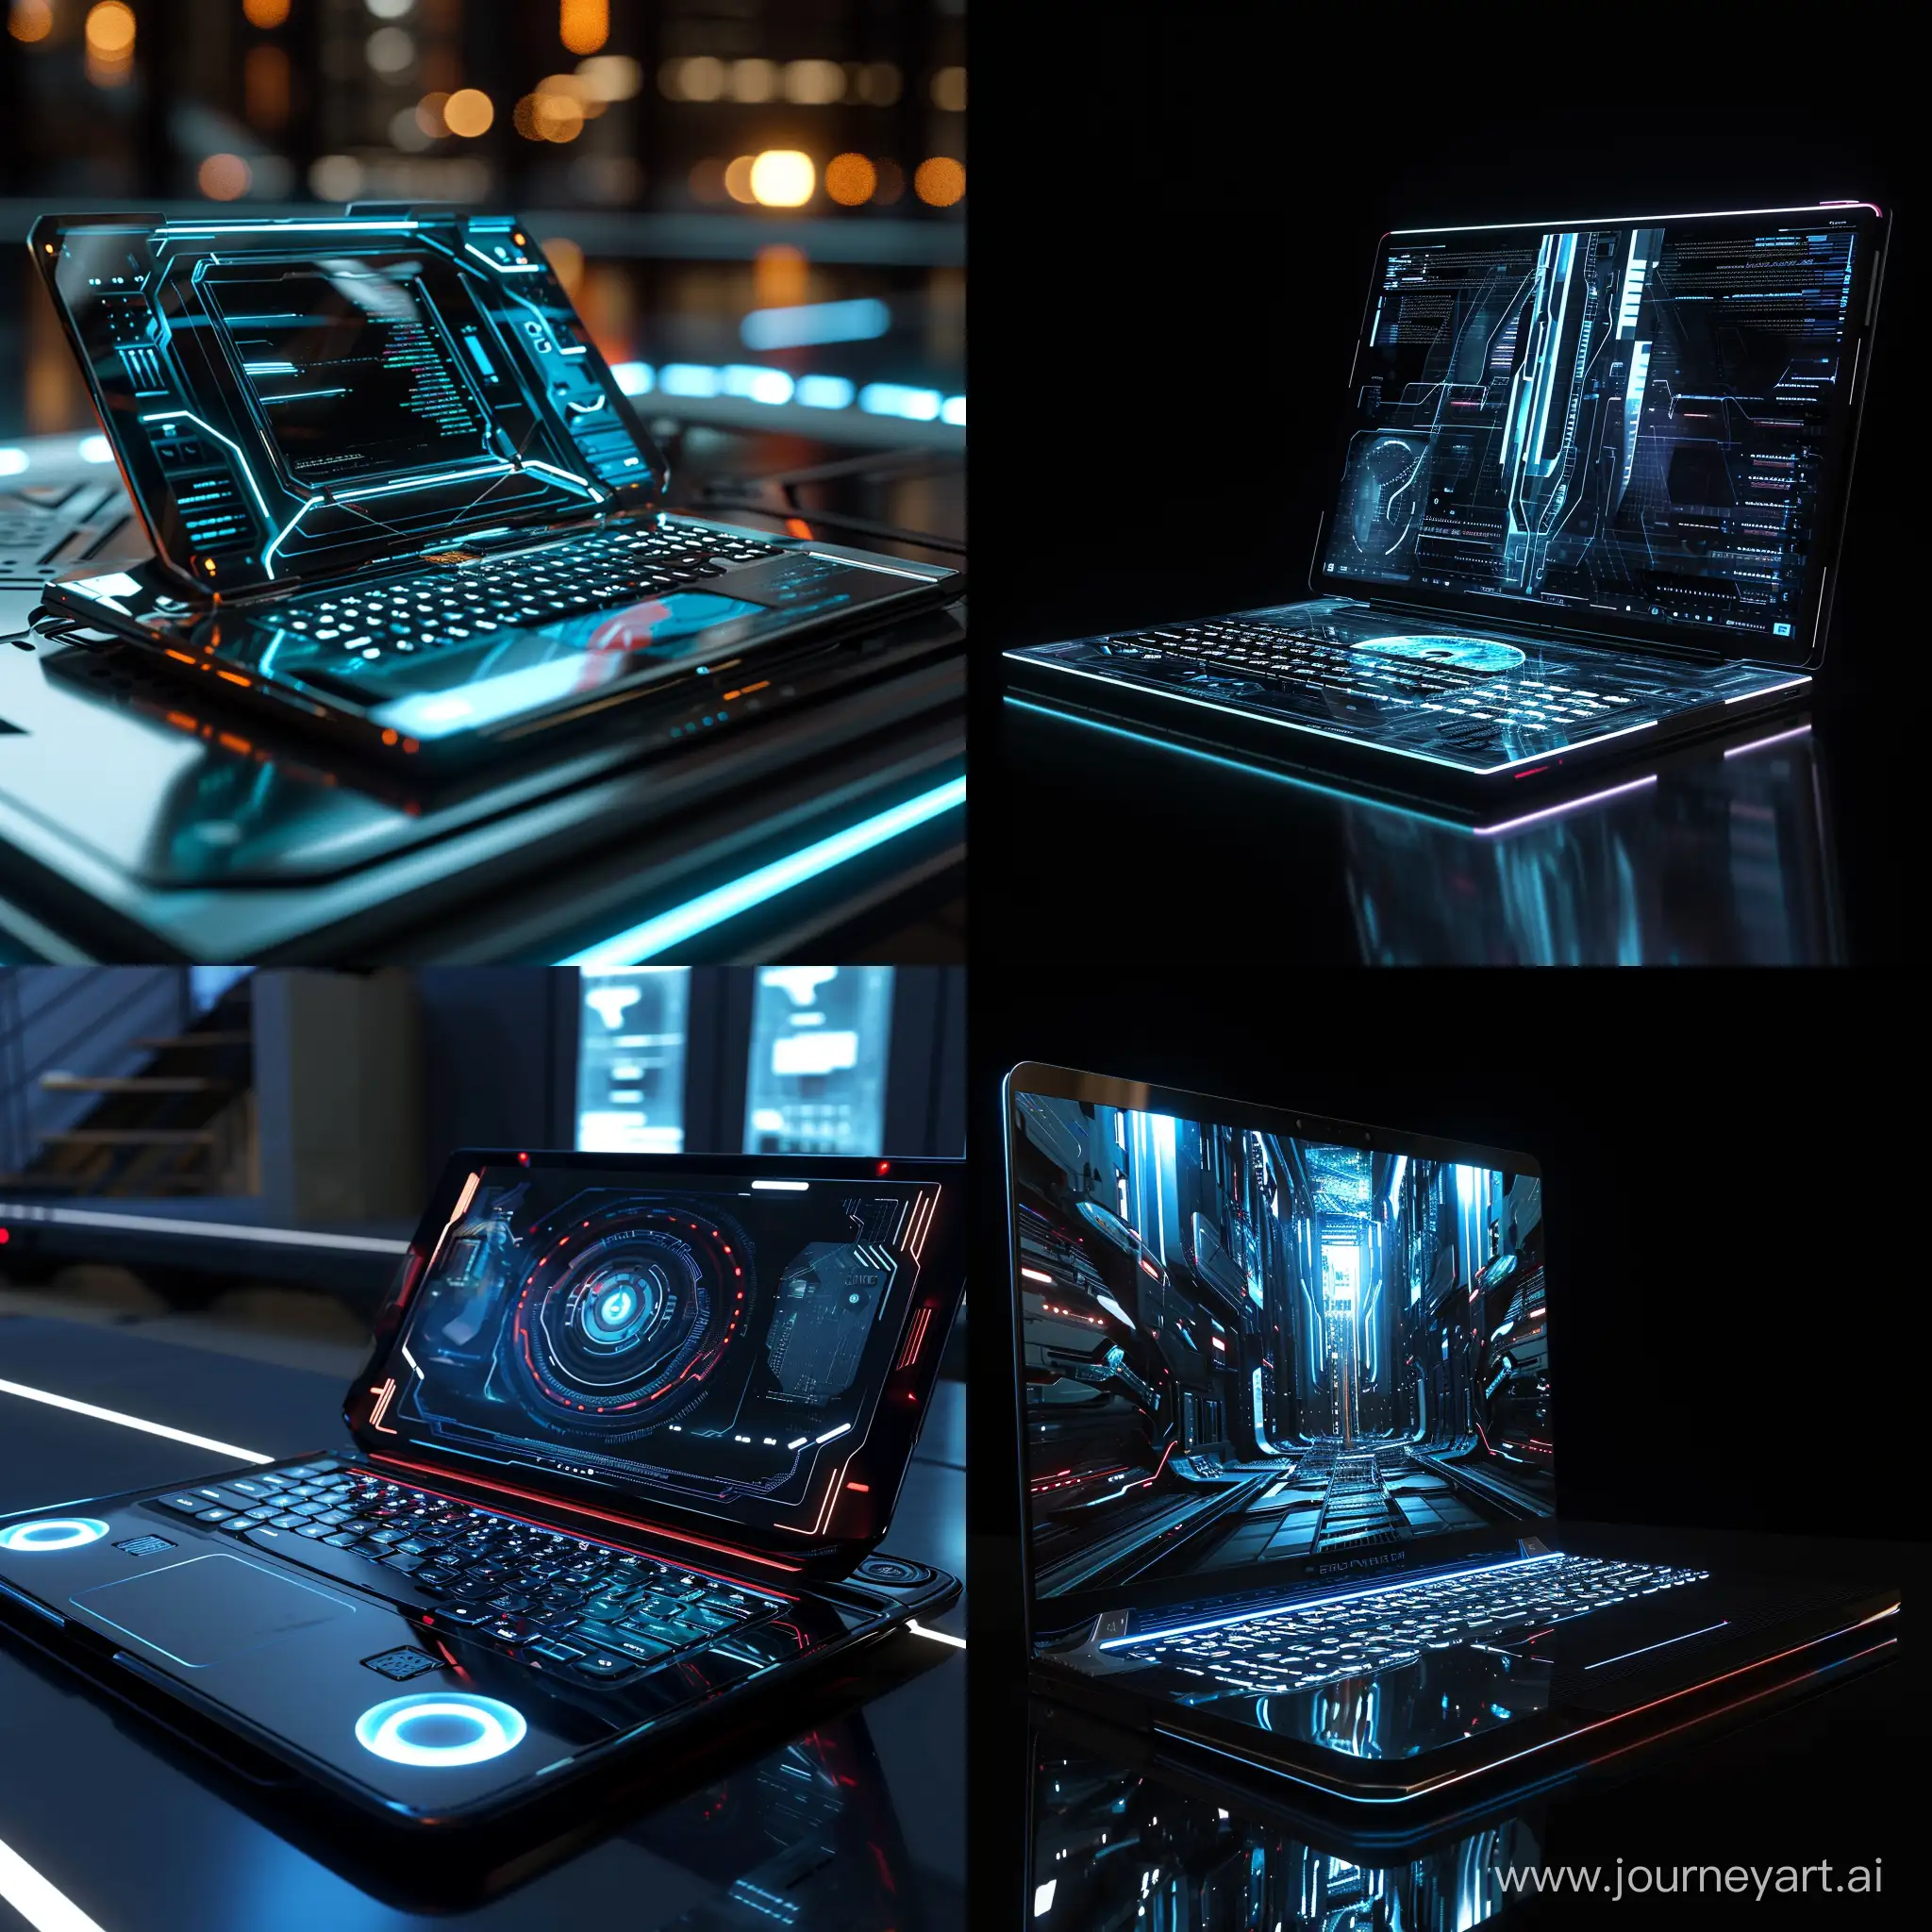 CuttingEdge-2020s-Futuristic-Laptop-with-Advanced-Features